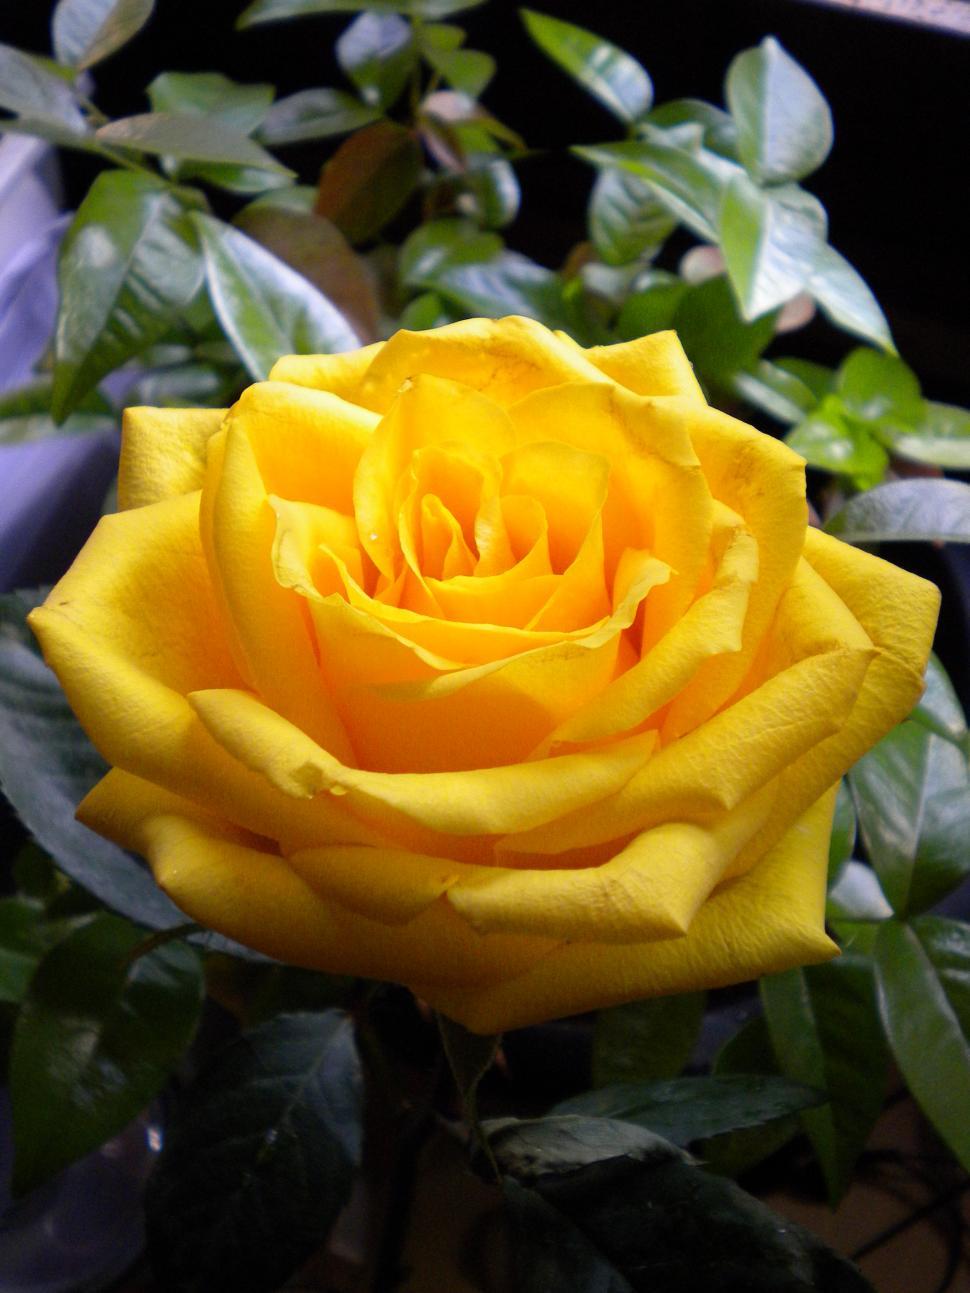 Download Free Stock Photo of yellow rose 